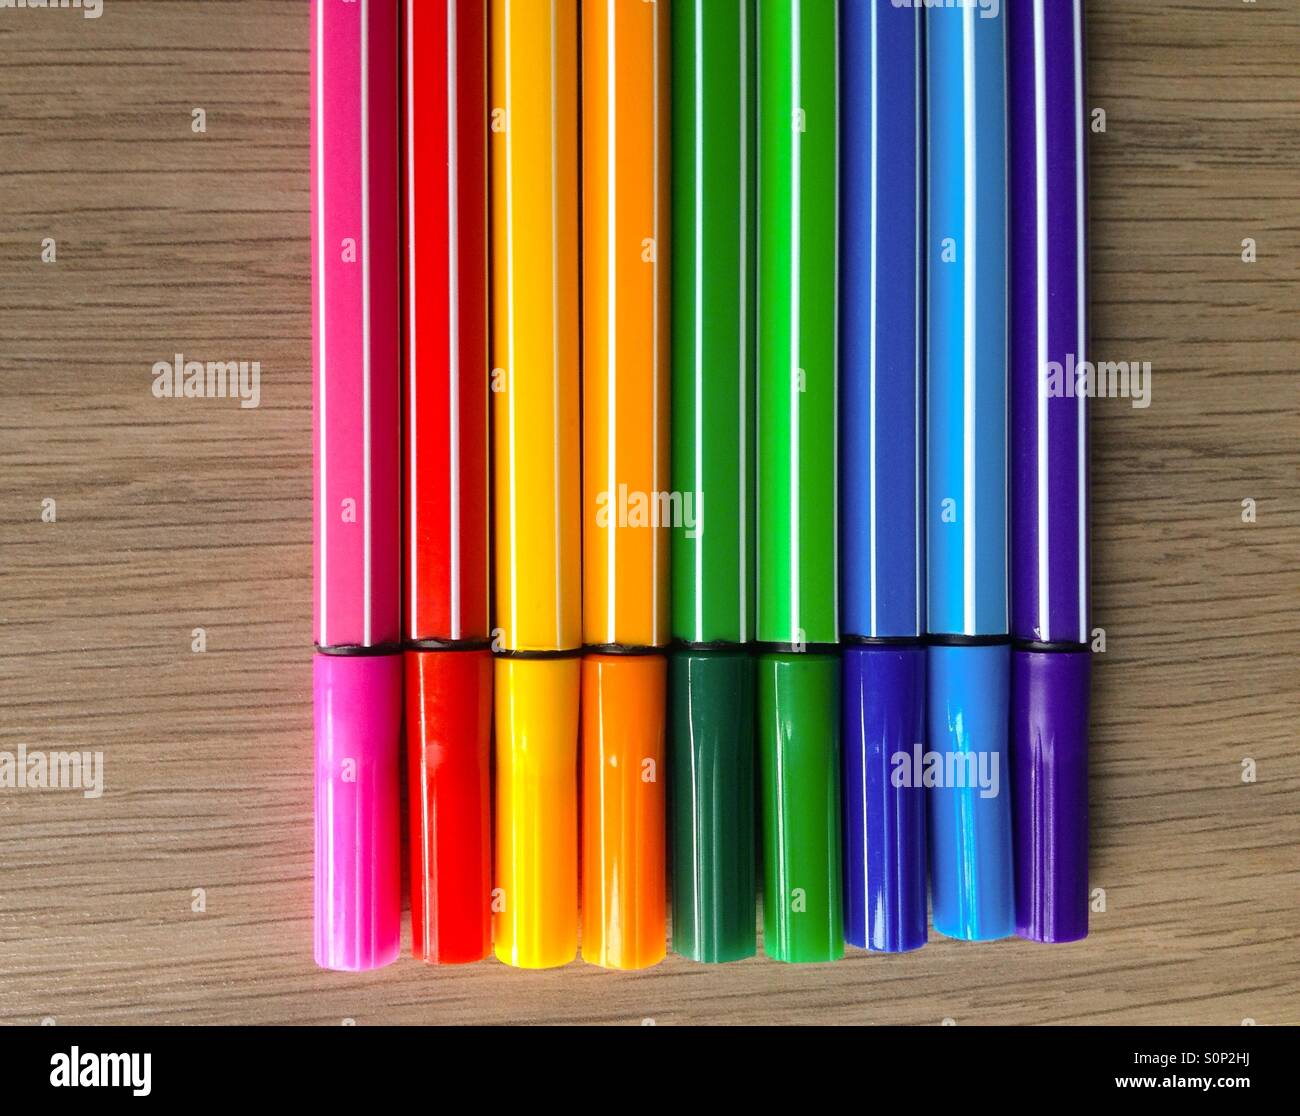 Colorful marker pens on a wooden background Stock Photo